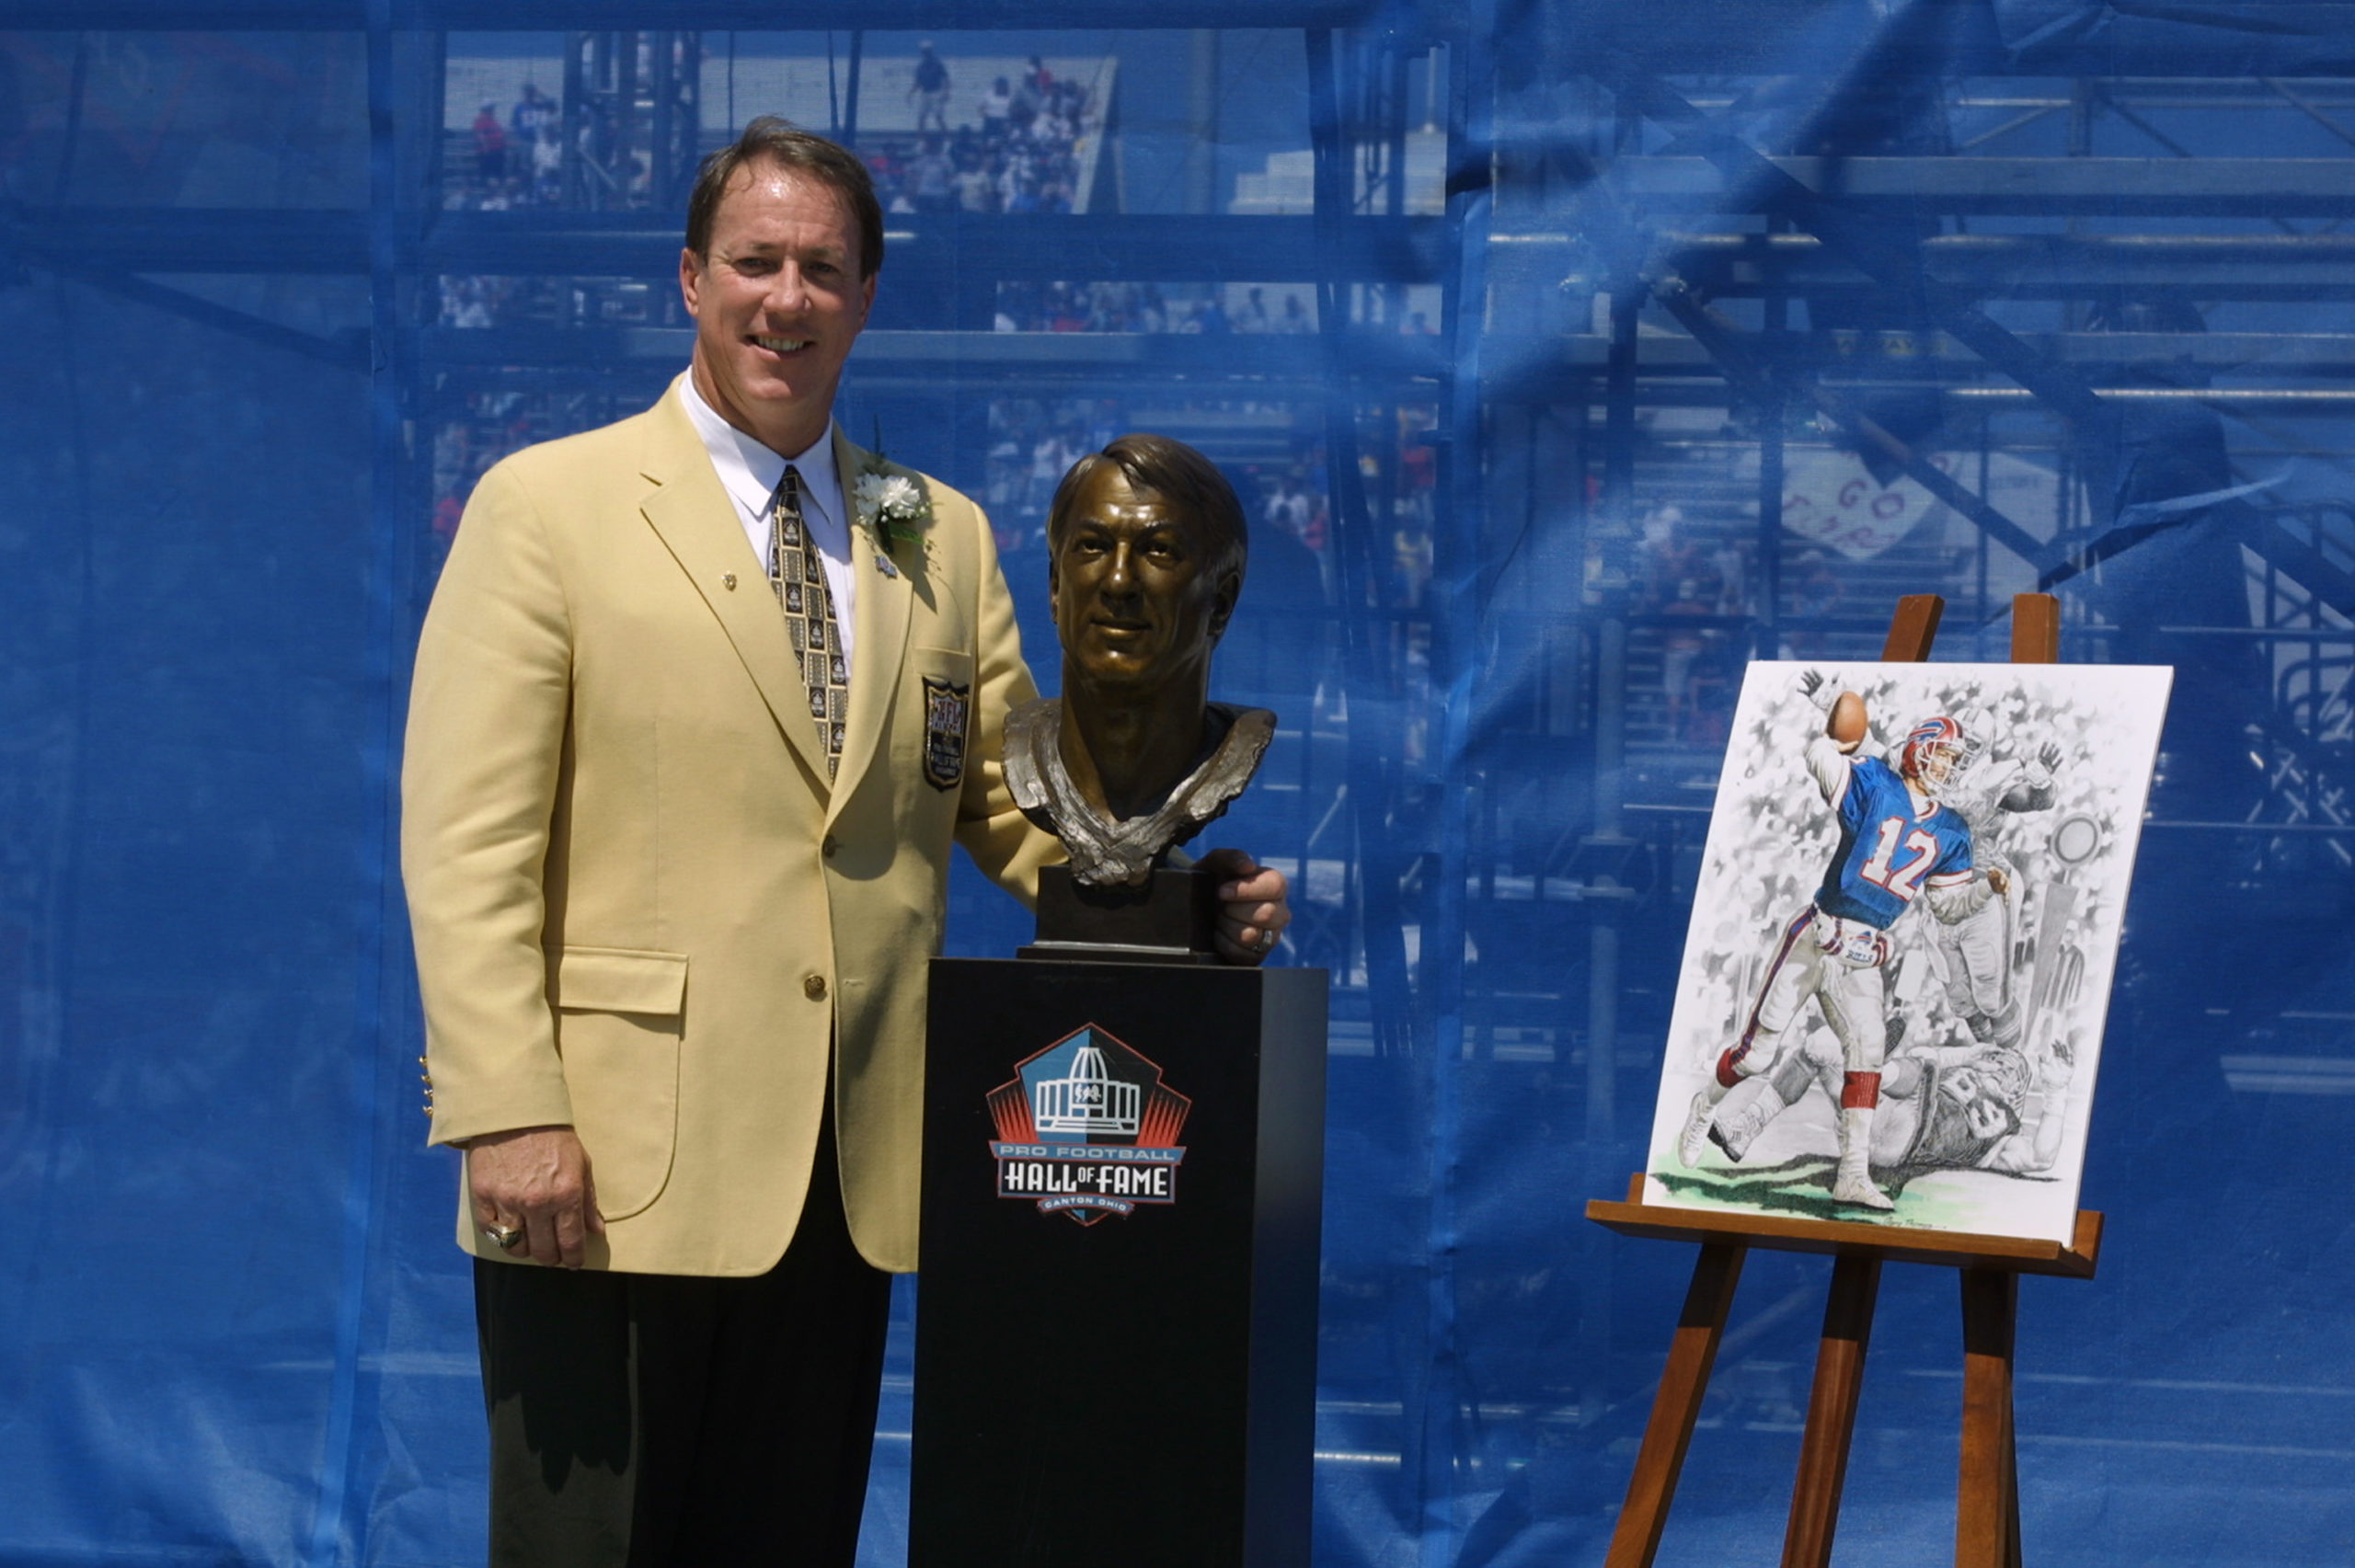 CANTON, OHIO - AUGUST 3: Jim Kelly stands next to his bust and artwork after his induction into the National Football League Hall of Fame on August 3, 2002 at Fawcett Stadium in Canton, Ohio. Kelly played quarterback for the Buffalo Bills from 1986 to 1996 and led the Bills to four straight Super Bowl appearences during his NFL career. Rick Stewart/Getty Images